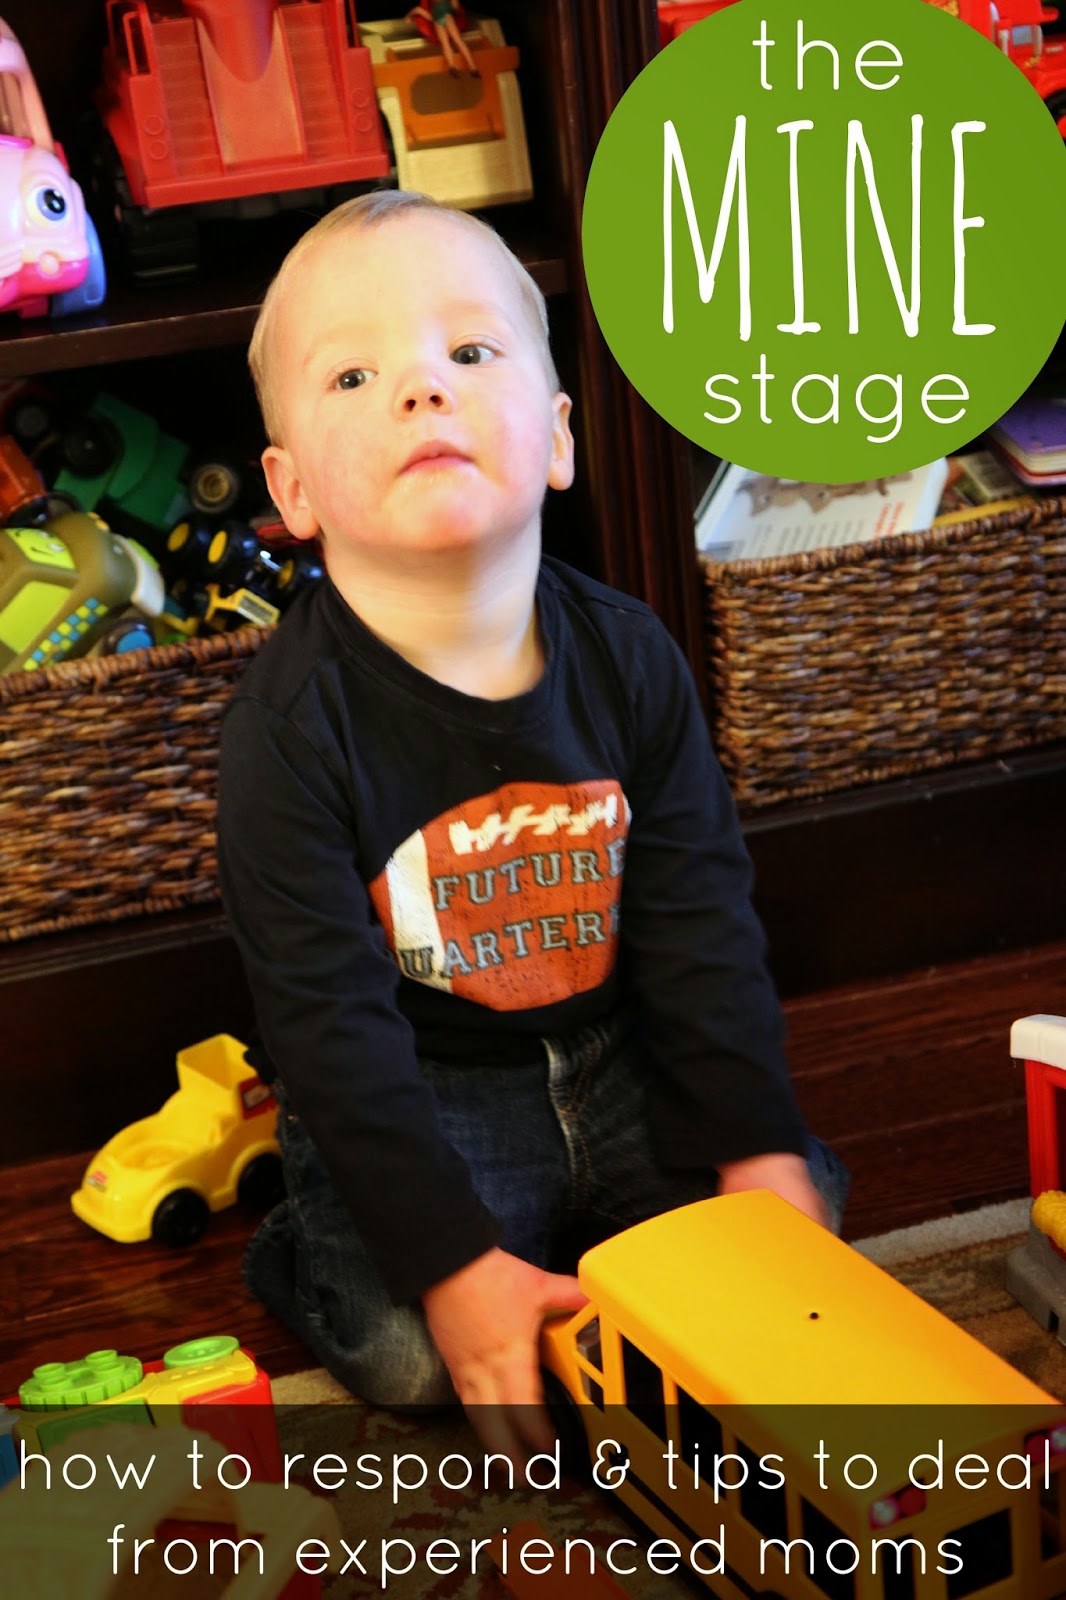 Toddler Approved! Tips for the Toddler "MINE" stage.